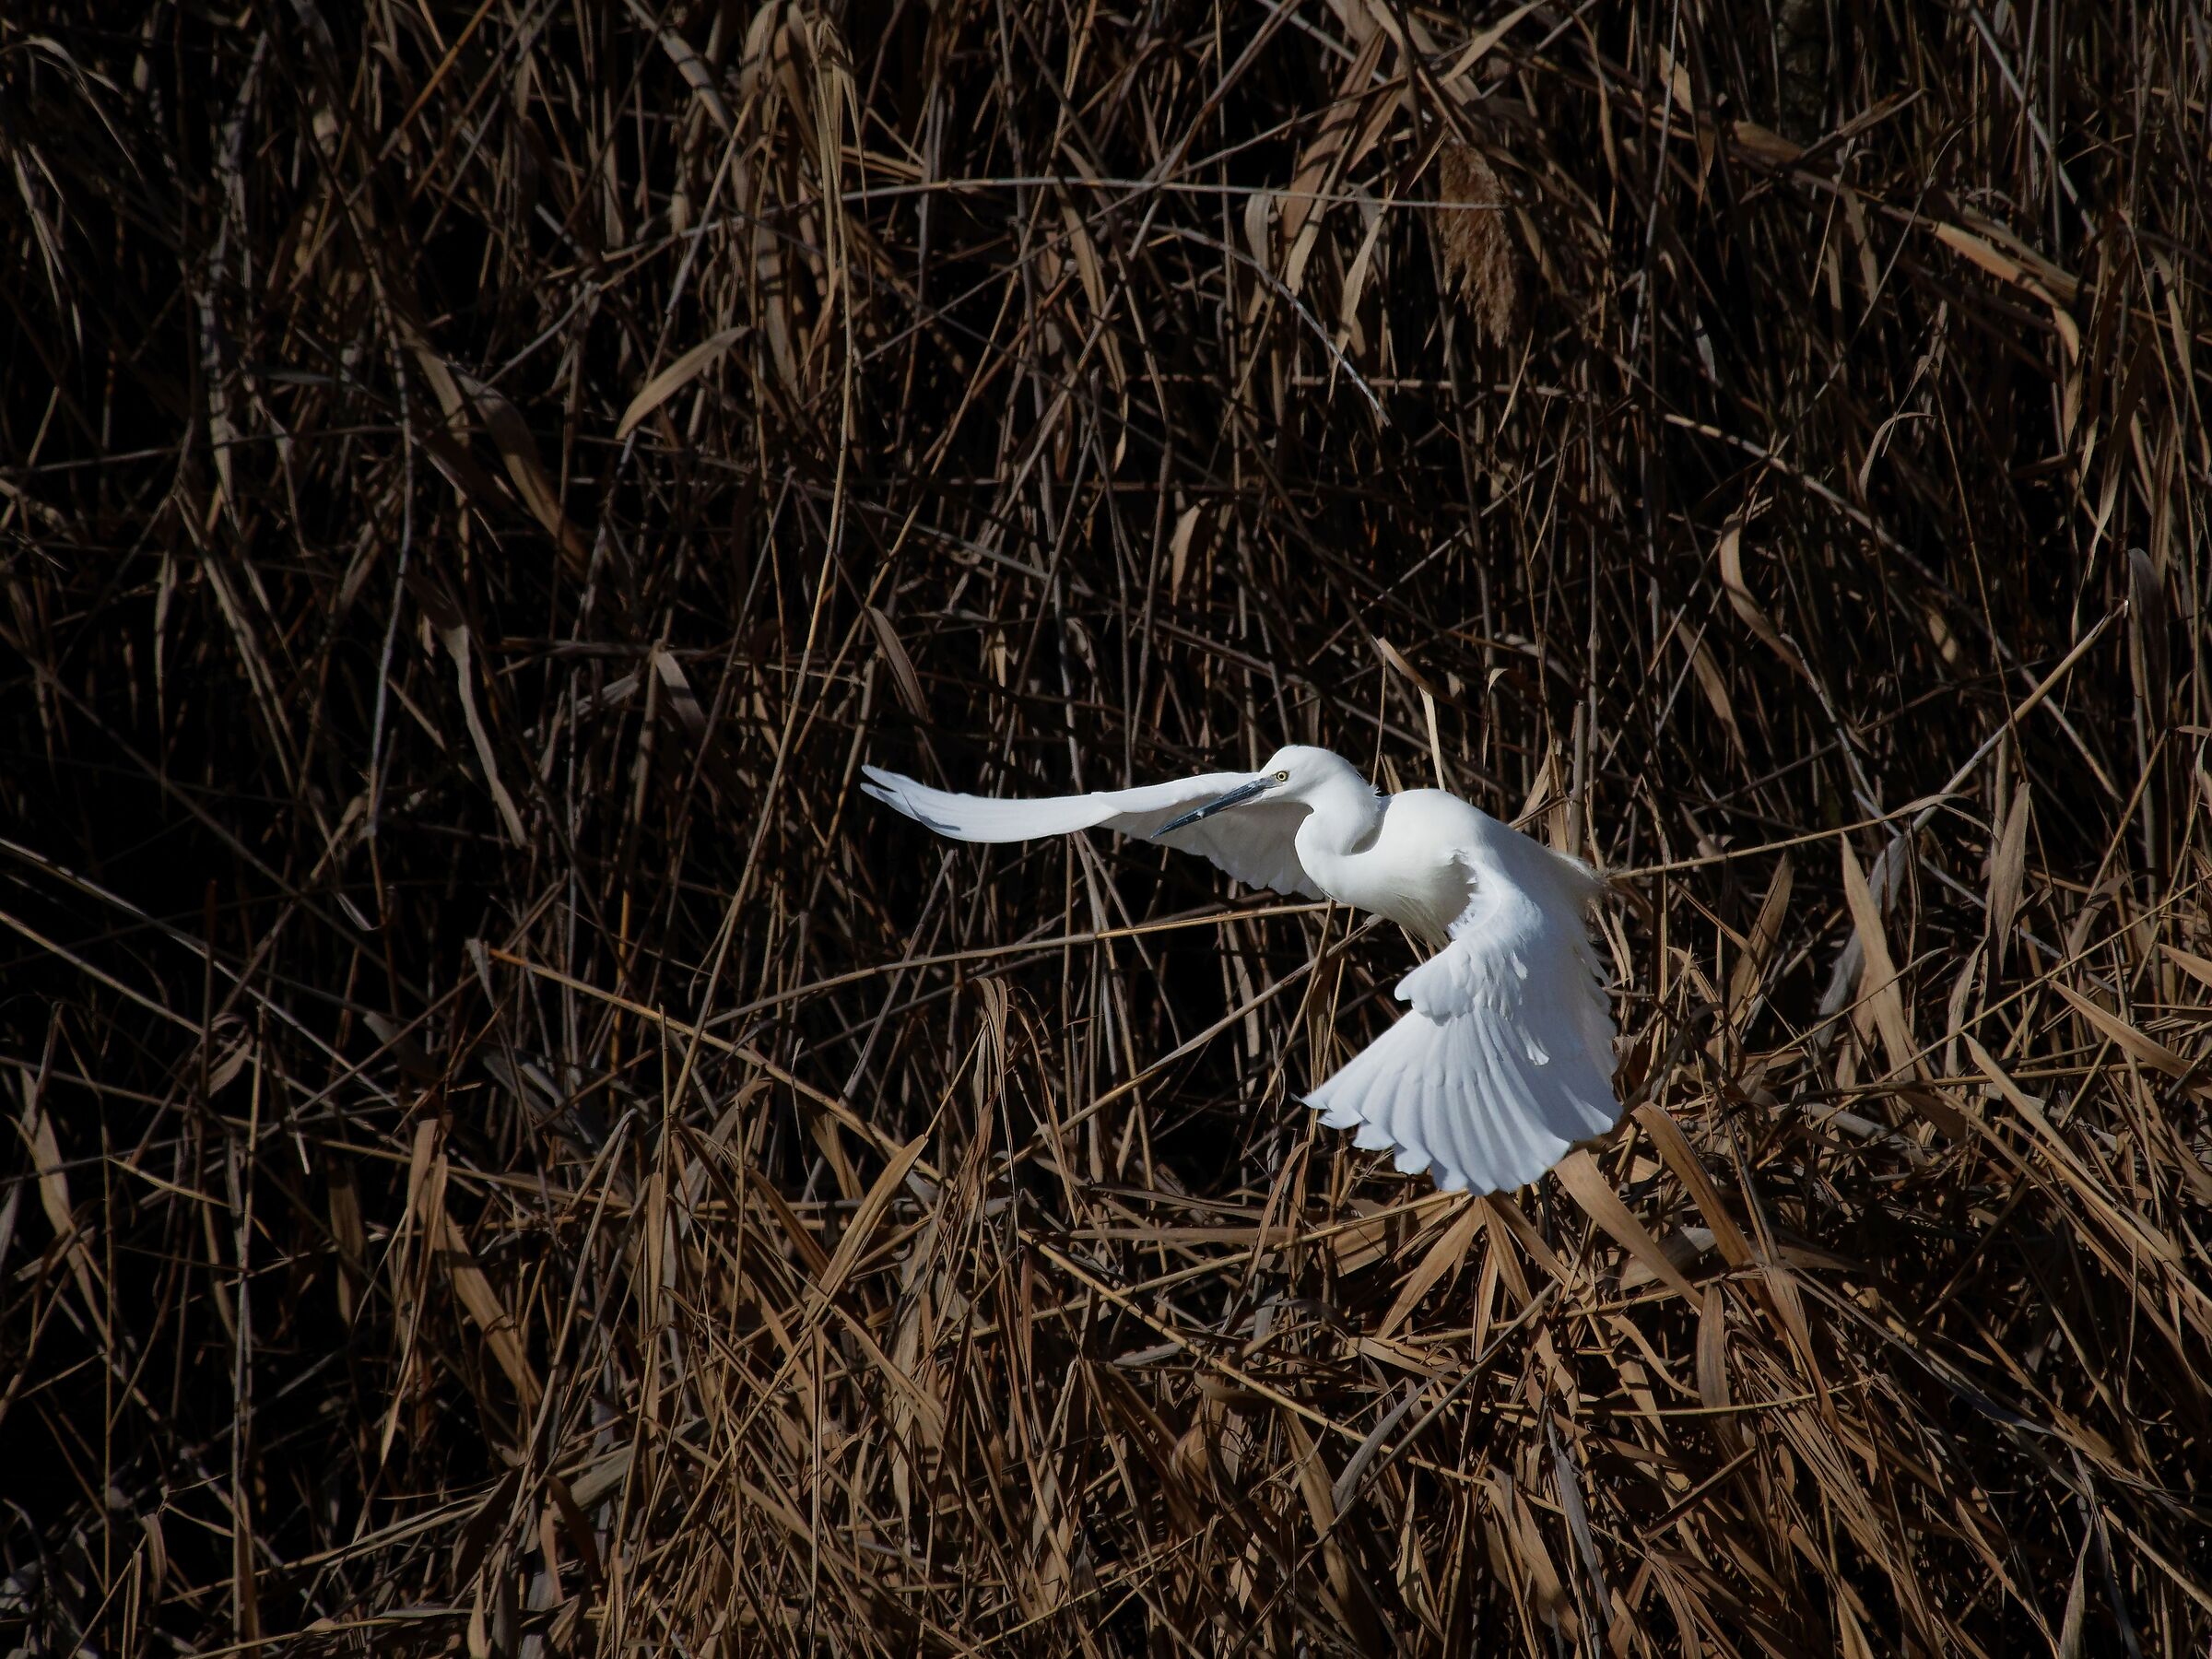 Take-off from the reeds of the egret...